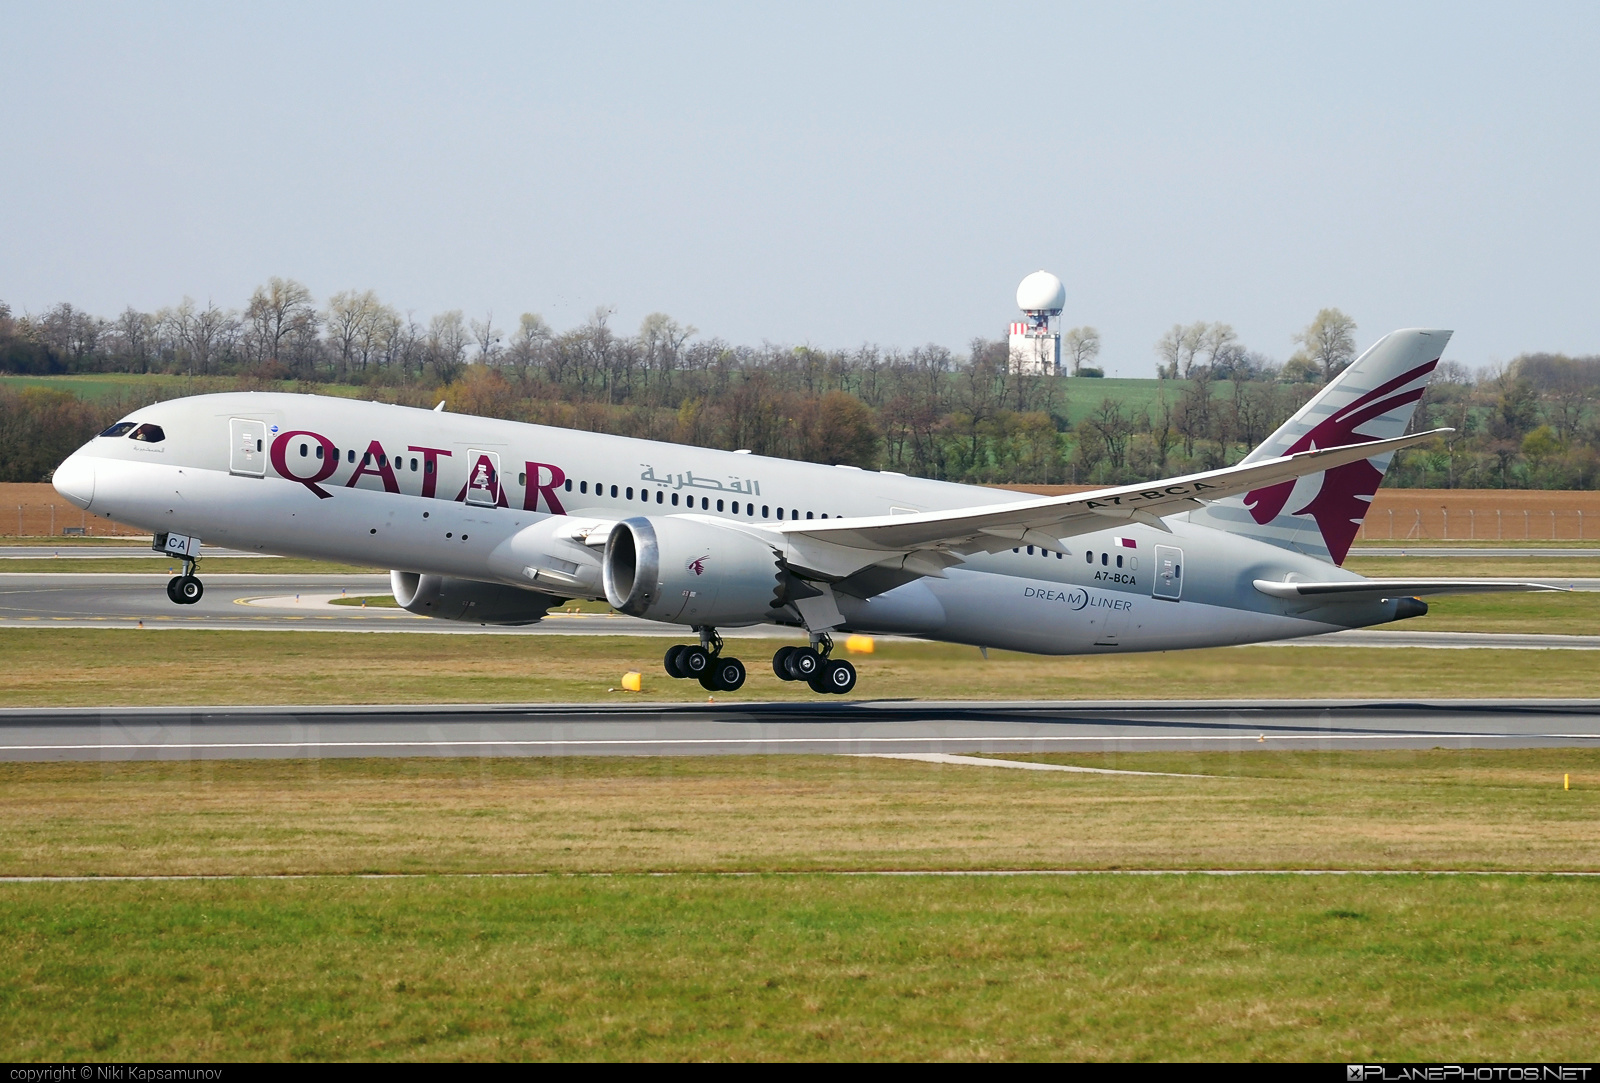 Boeing 787-8 Dreamliner - A7-BCA operated by Qatar Airways #b787 #boeing #boeing787 #dreamliner #qatarairways